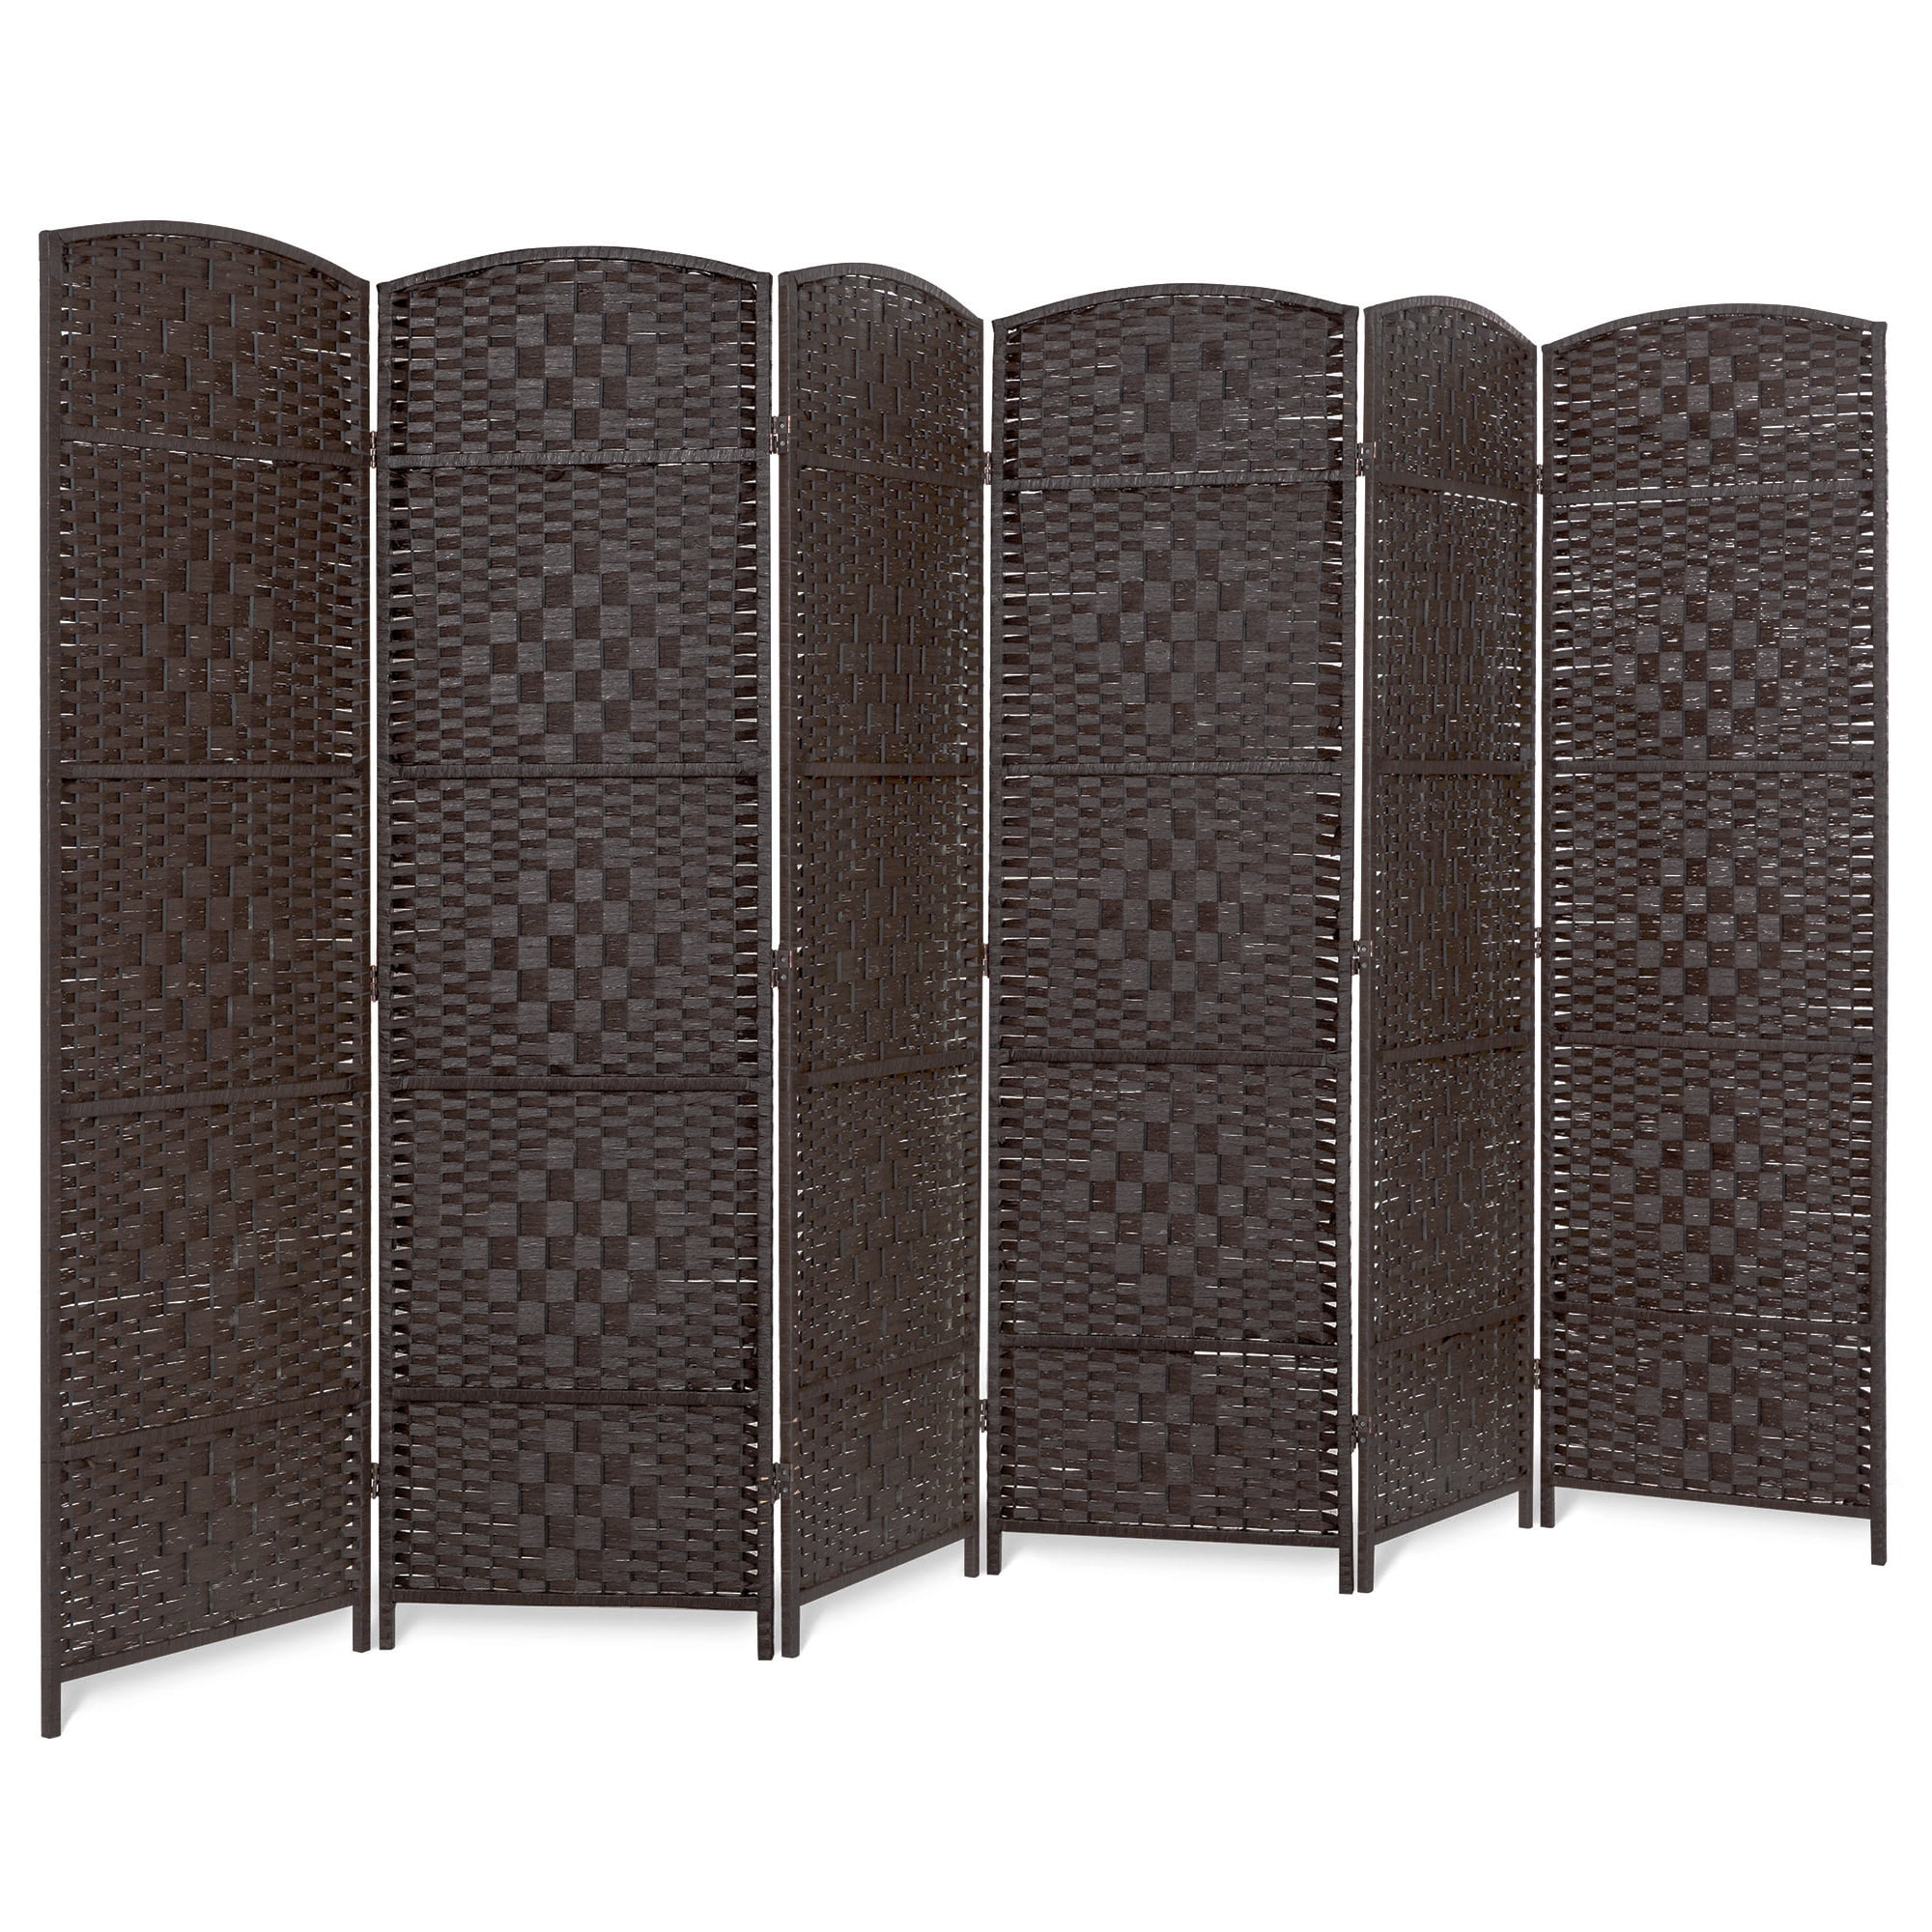 Rose Home Fashion RHF 6 ft.Tall-15.7 Wide Diamond Weave Fiber 4 Panels Room Divider/4 Panels Screen Folding Privacy Partition Wall Room Divider Freestanding 4 Panel Light Beige